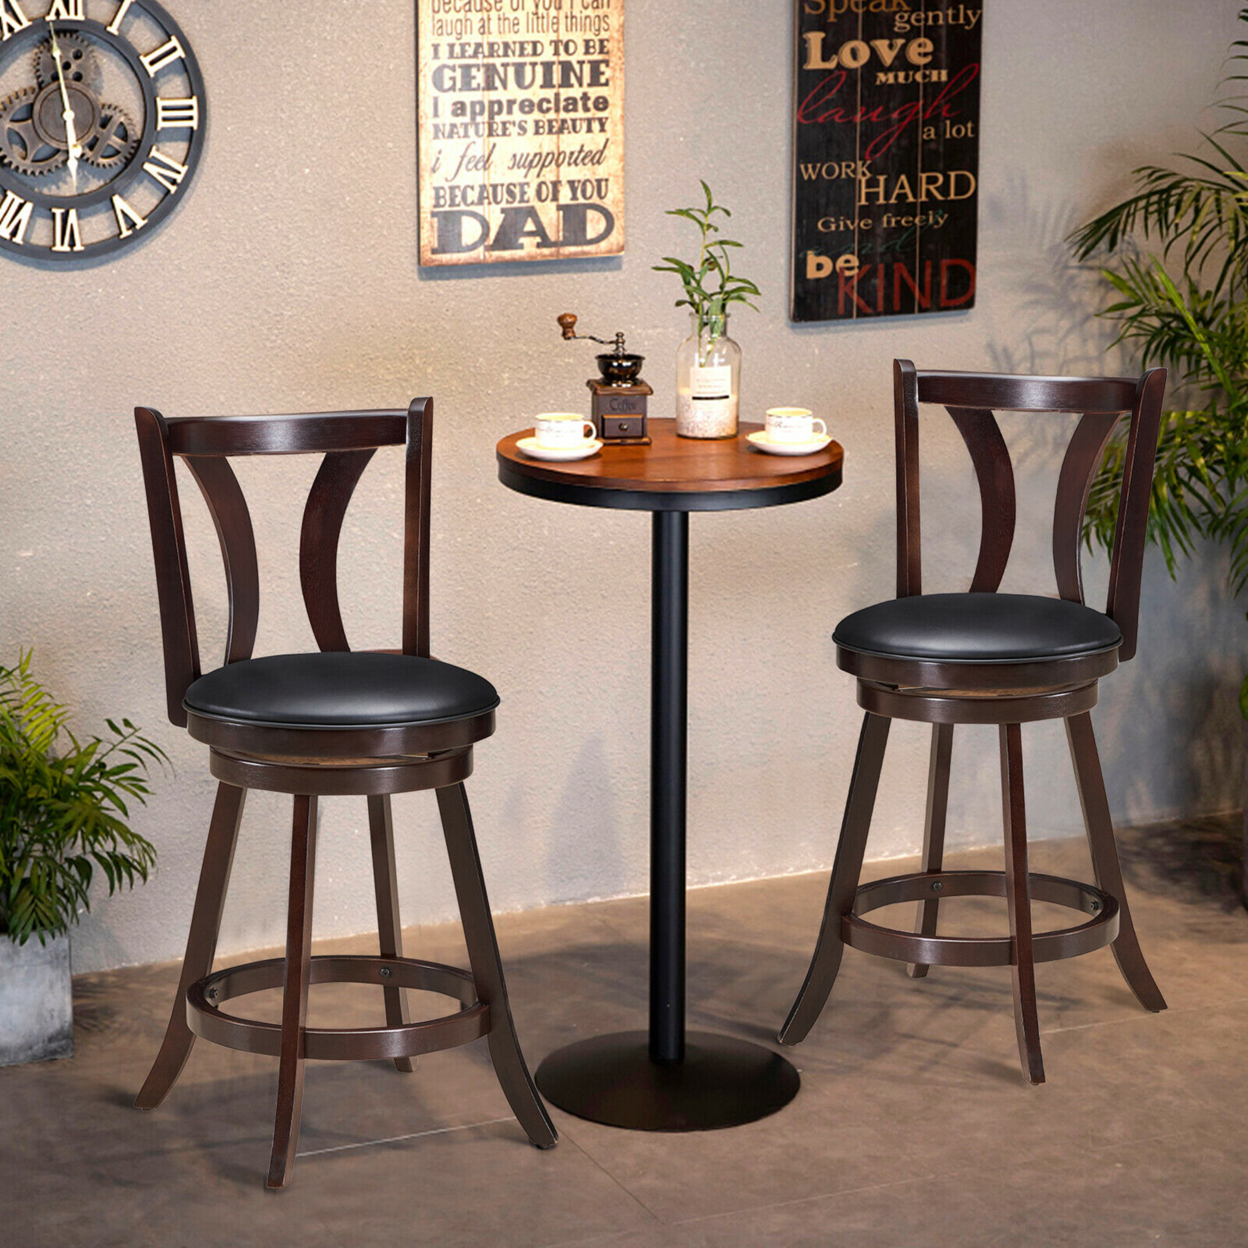 Set Of 2 Swivel Bar Stool 24'' Counter Height Leather Padded Dining Kitchen Chair